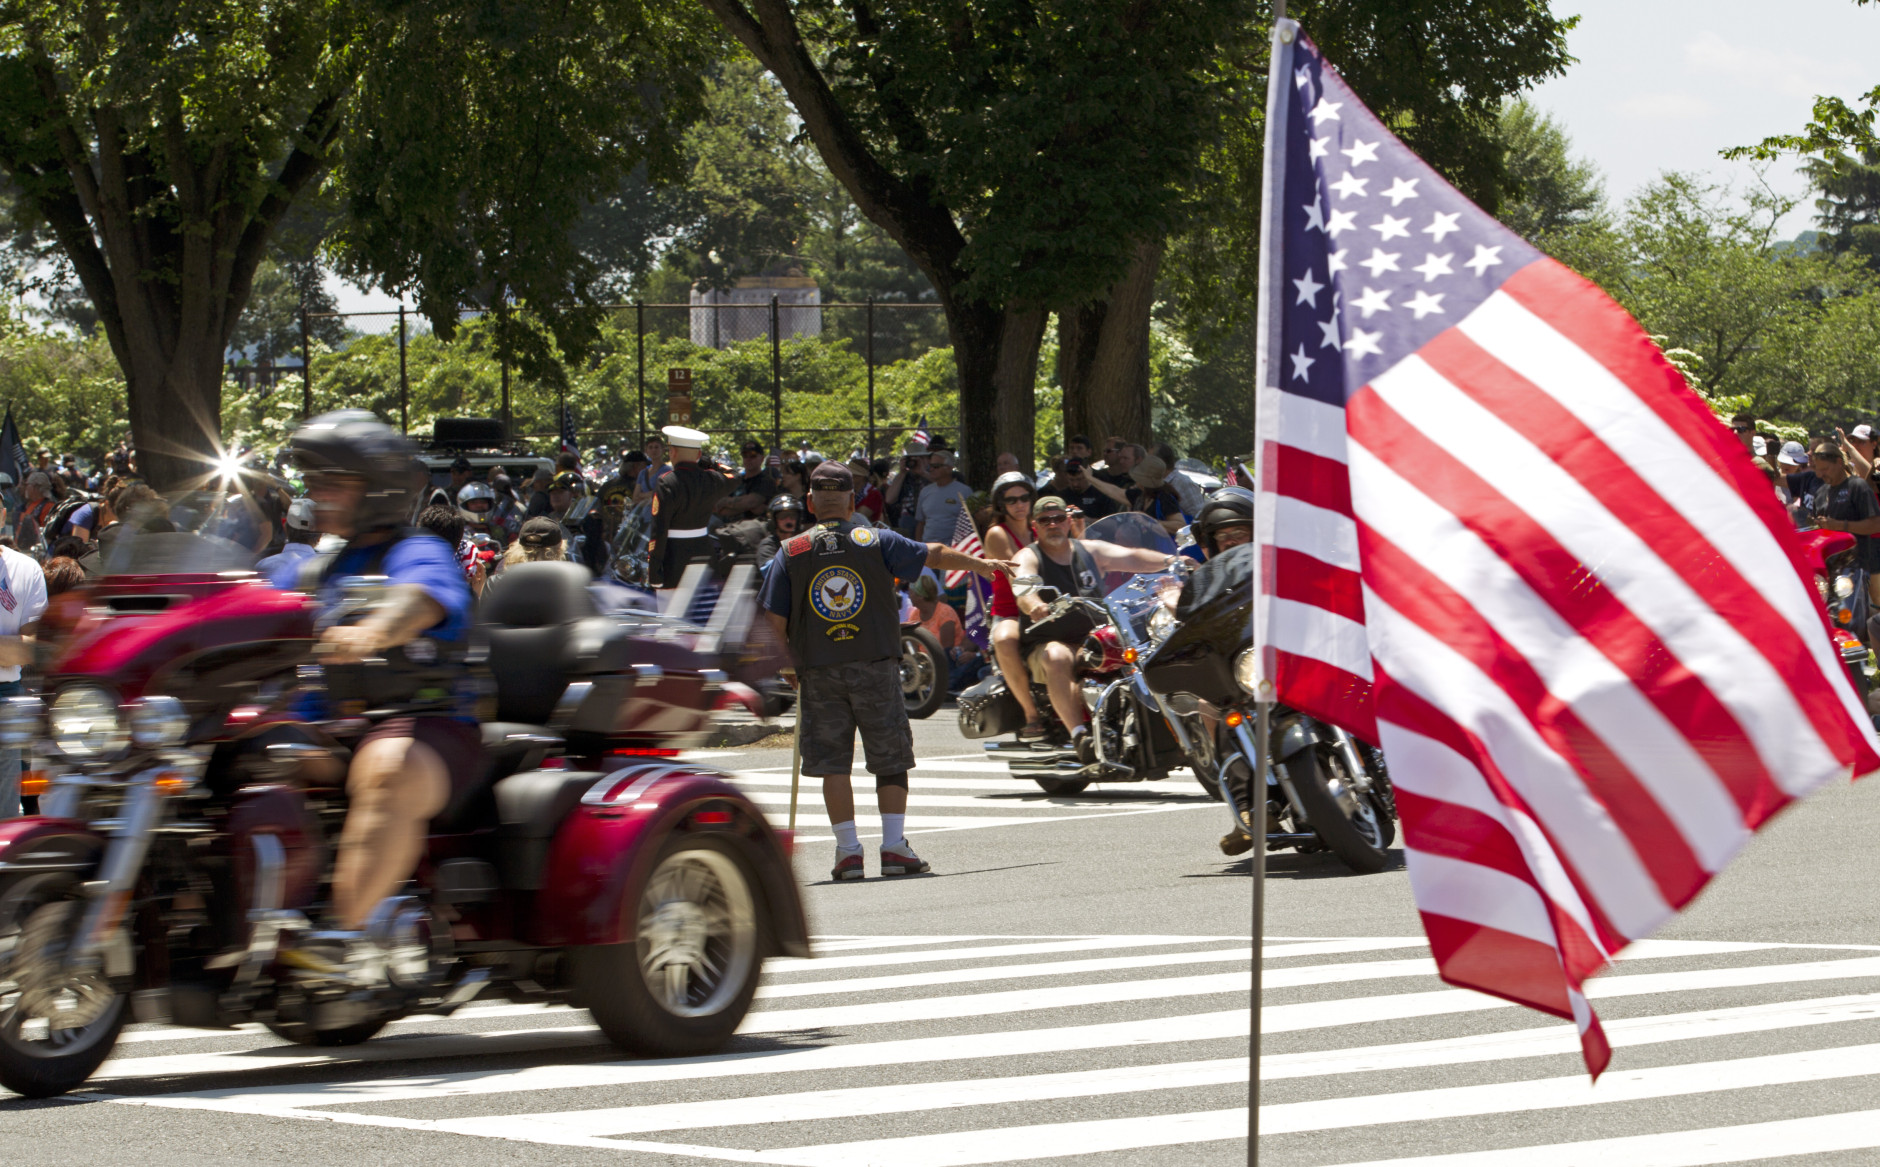 Participants in the Rolling Thunder annual motorcycle rally ride in the national mall during the annual Rolling Thunder parade ahead of Memorial Day in Washington, Sunday, May 24, 2015.  (AP Photo/Jose Luis Magana)